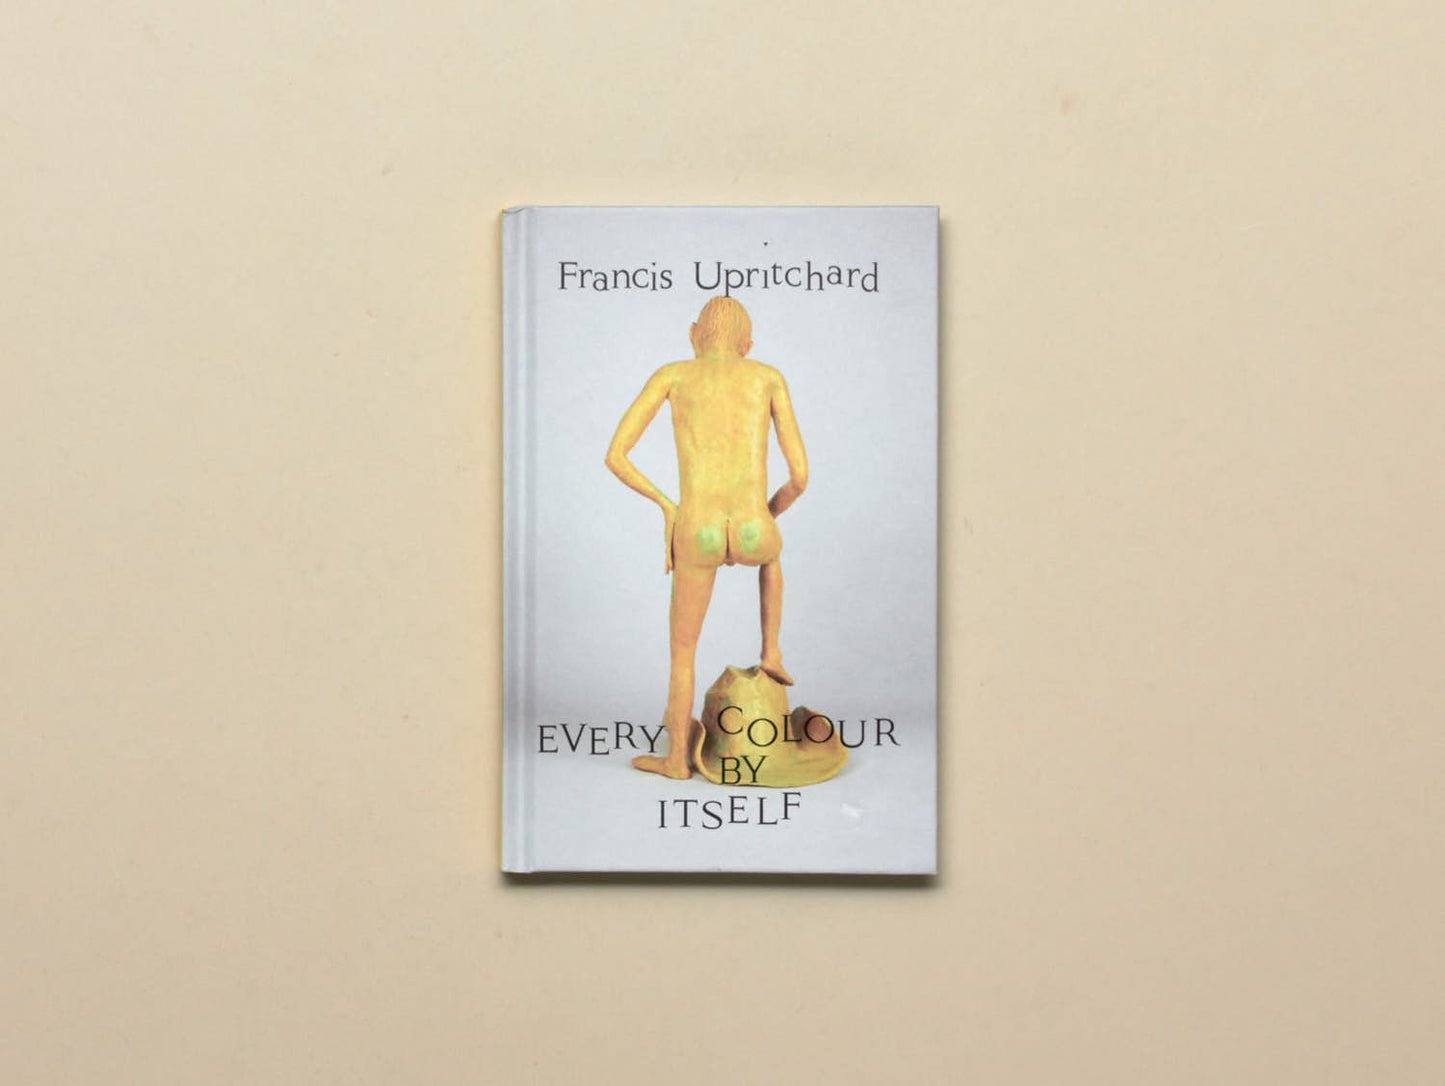 Francis Upritchard, Every Colour by Itself